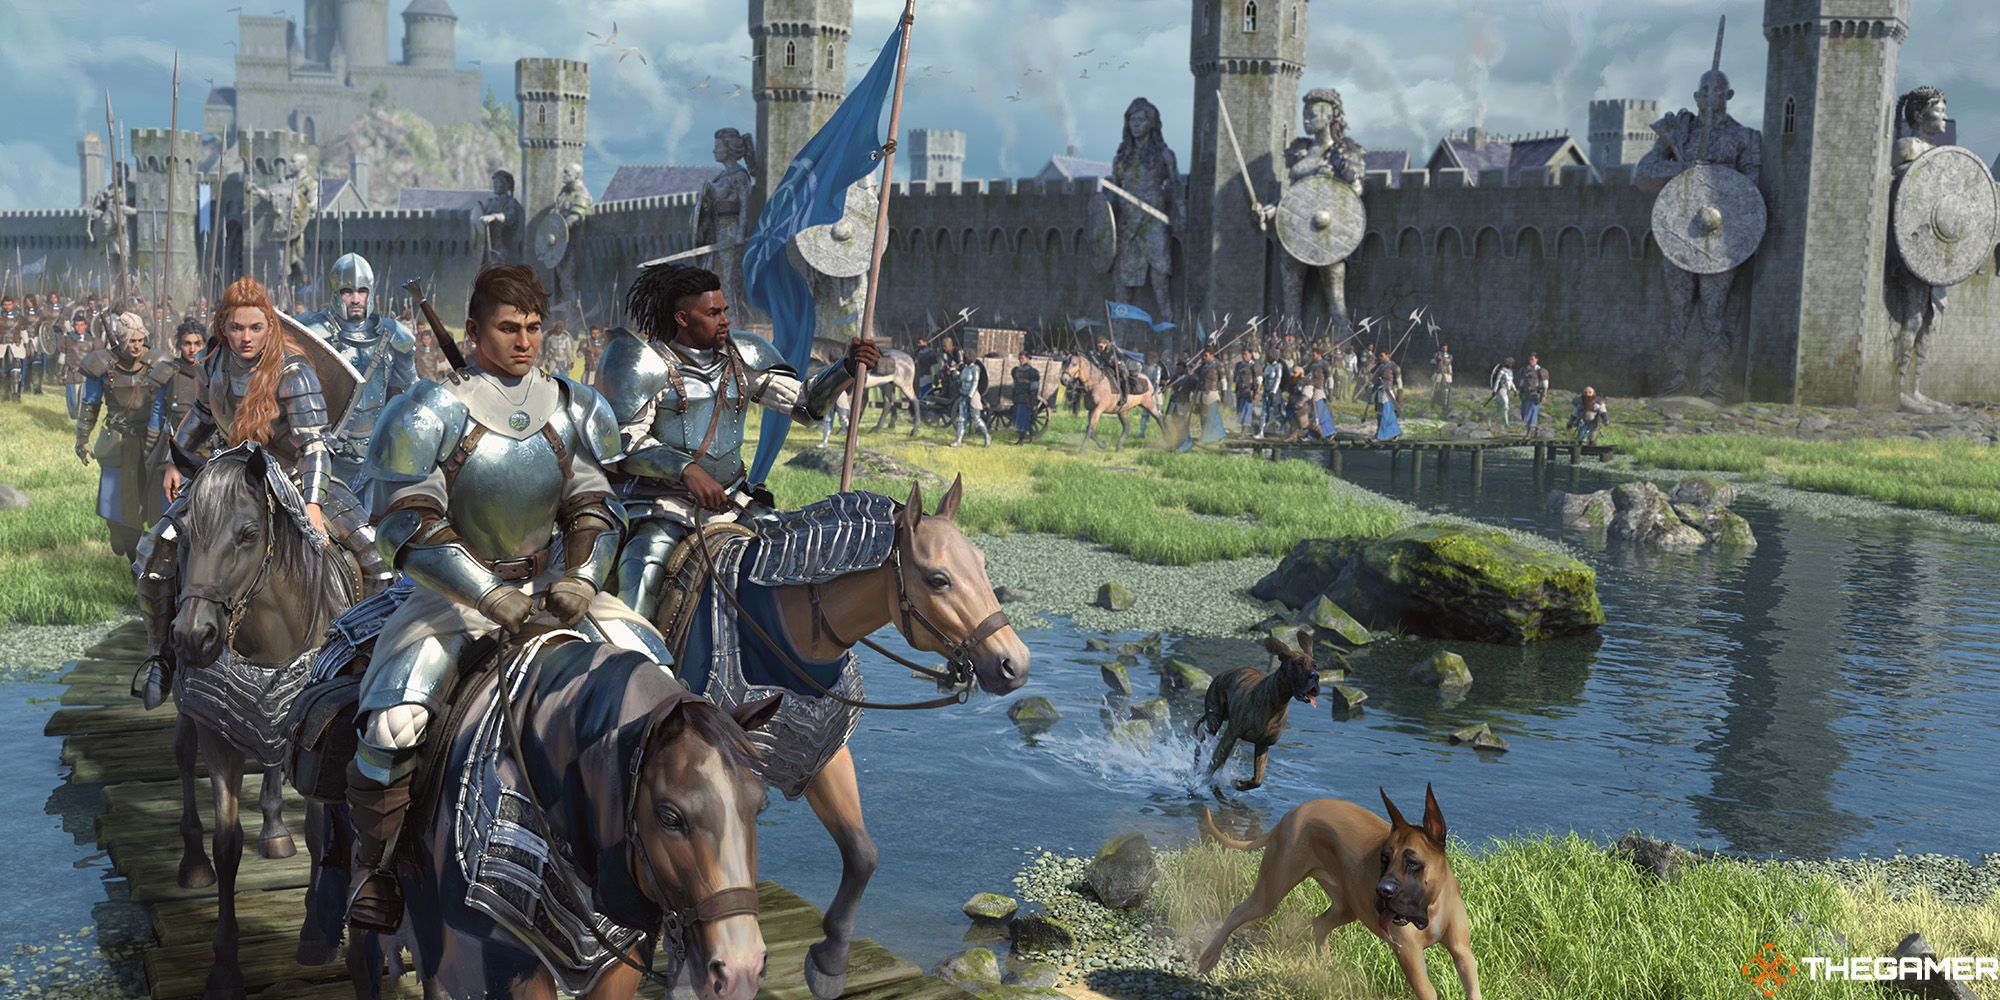 An army of knights is riding horses and starting a journey outside their castle.